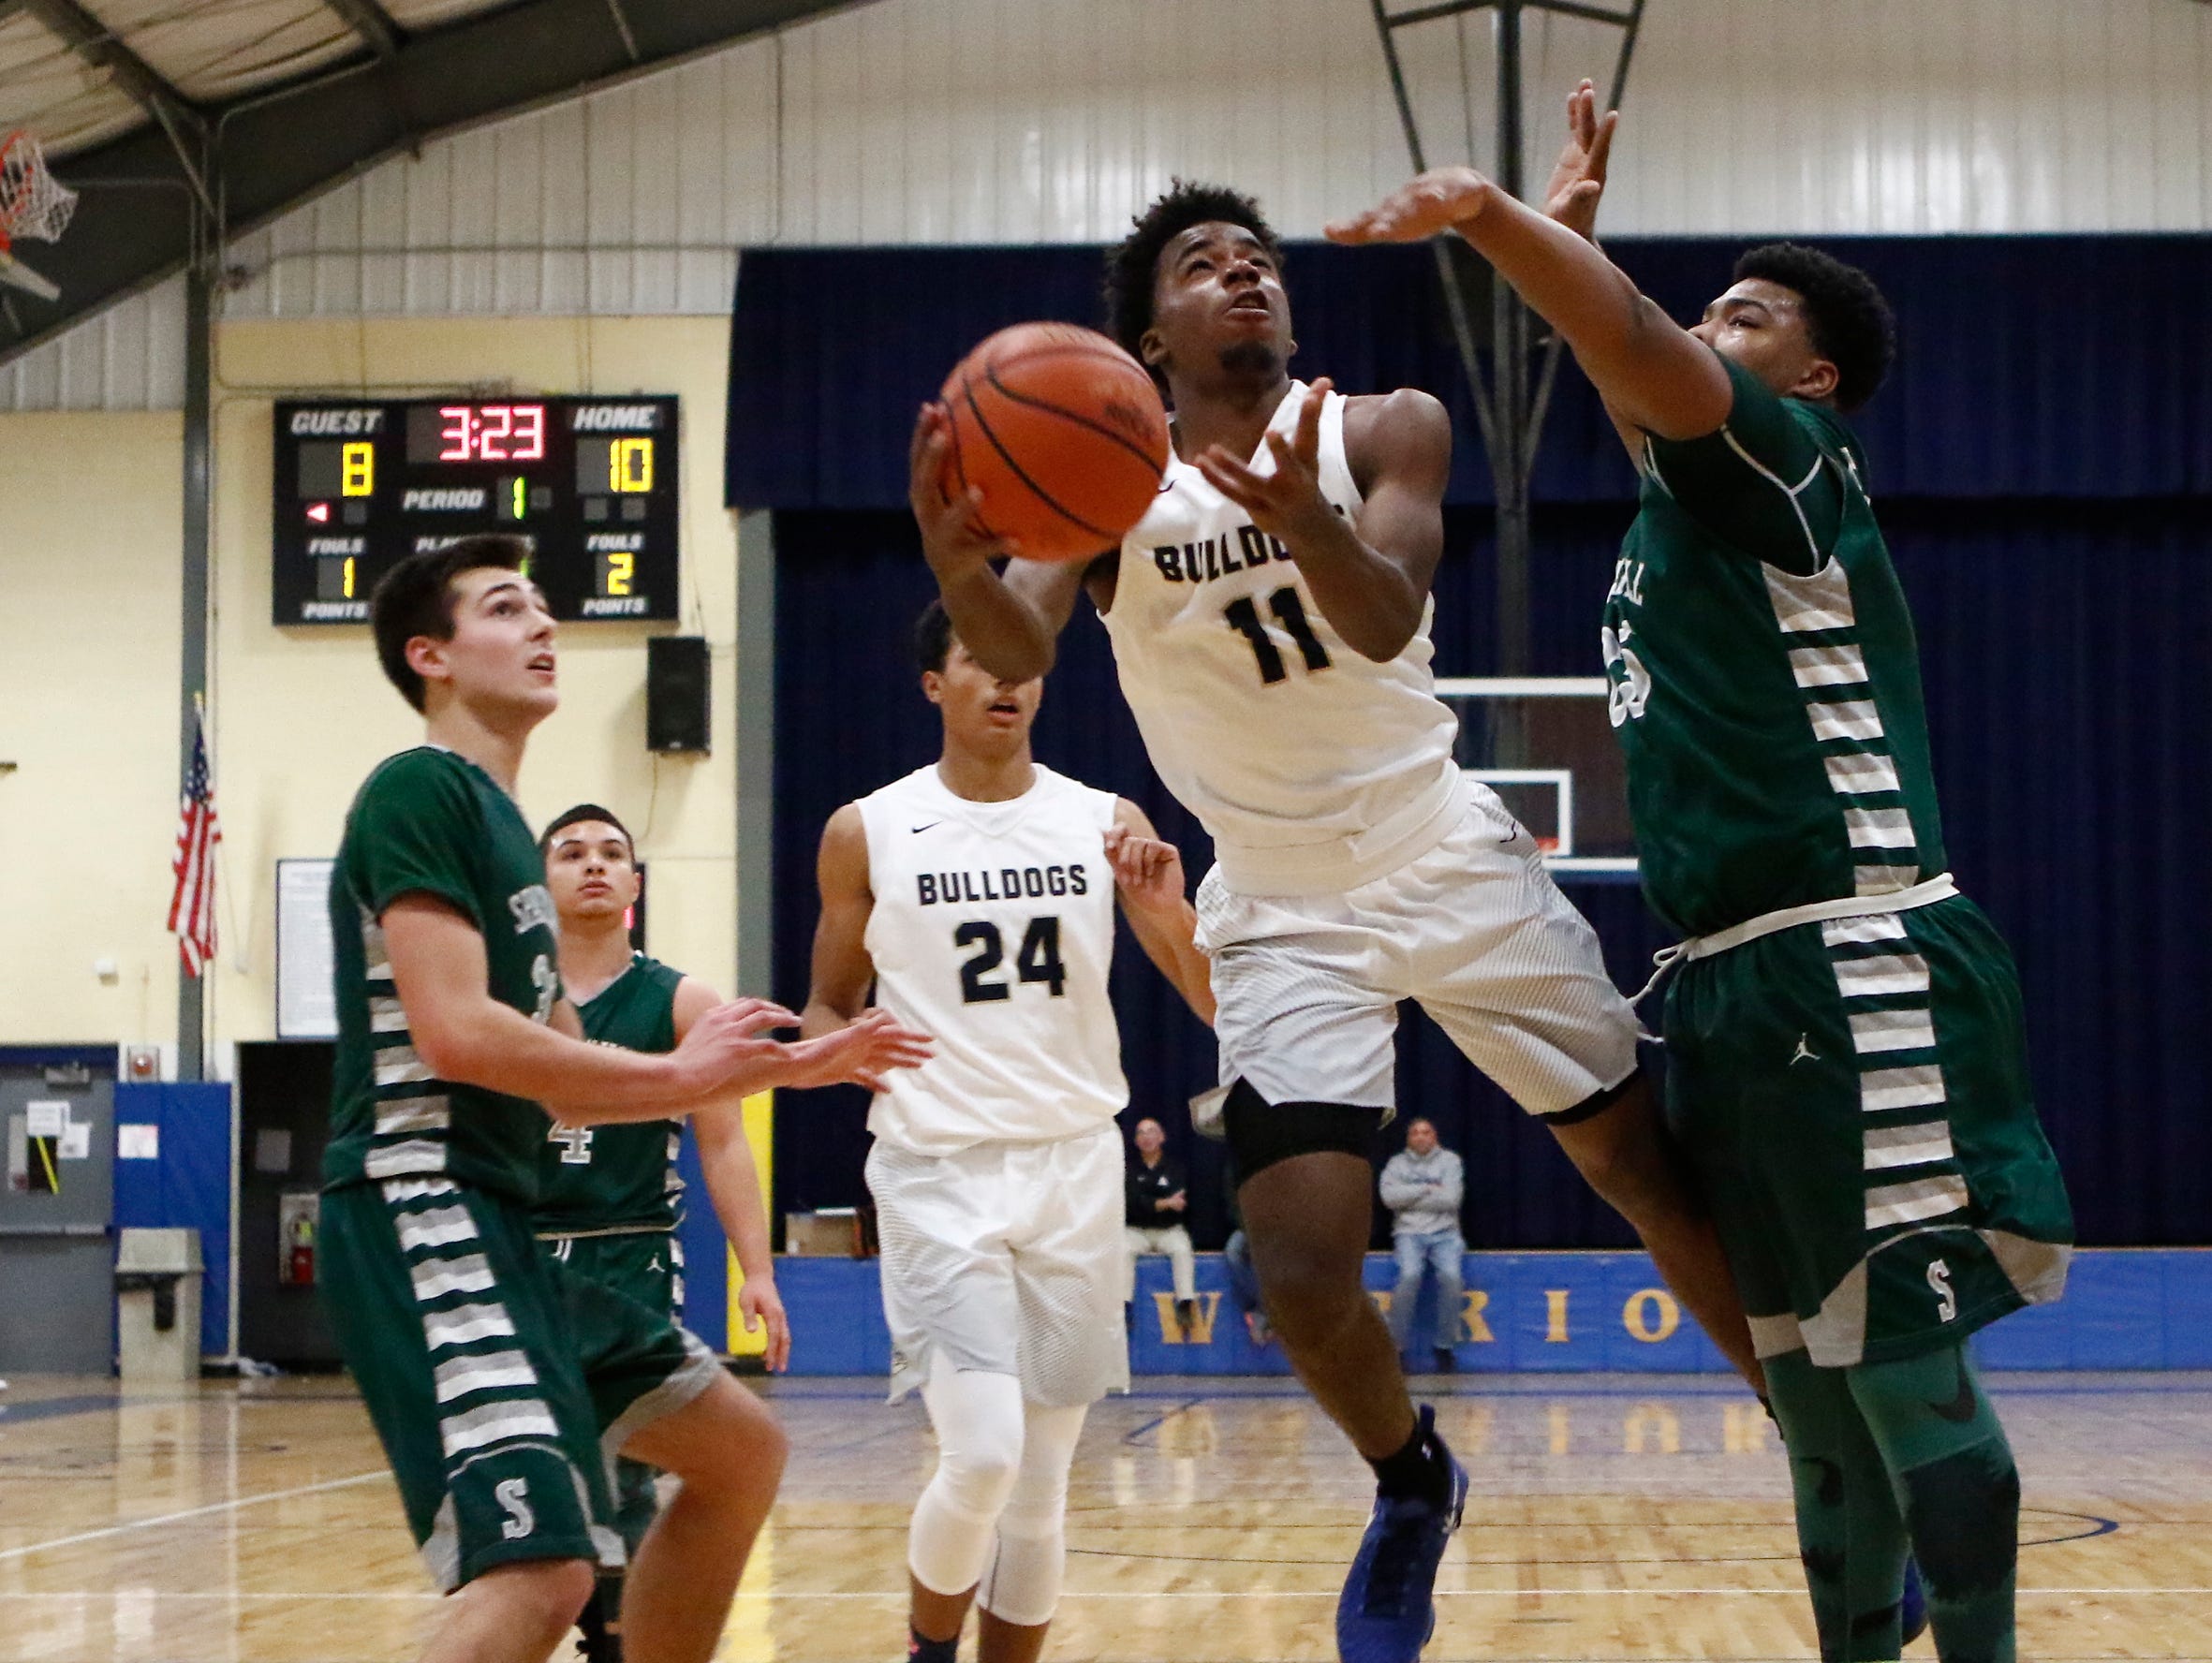 Beacon's Zamere McKenzie (11) drives on Spackenkill's Kyiev Bennermon (25) in the championship game of the Duane Davis memorial basketball tournament at Our Lady of Lourdes High School in Poughkeepsie on Saturday, December 31, 2016.